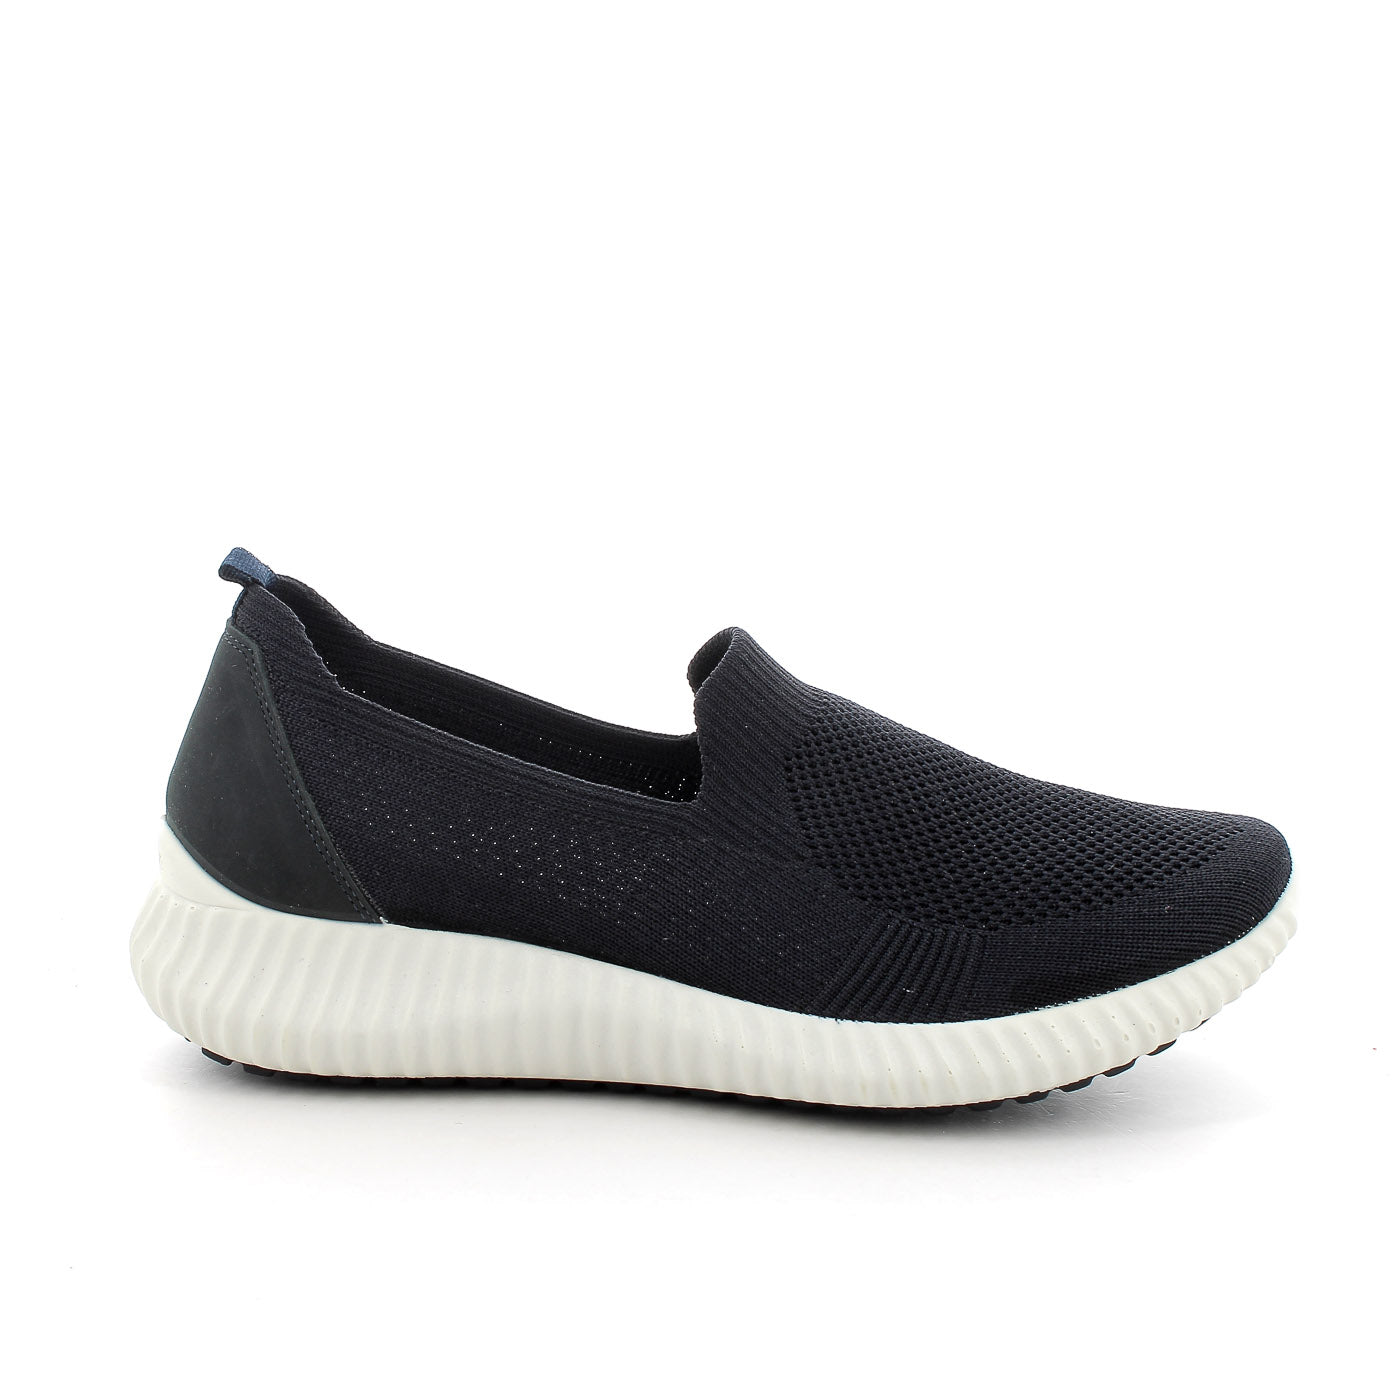  Sleek view of IGI & Co Italian Runner Sneakers with black textile upper and white sole.